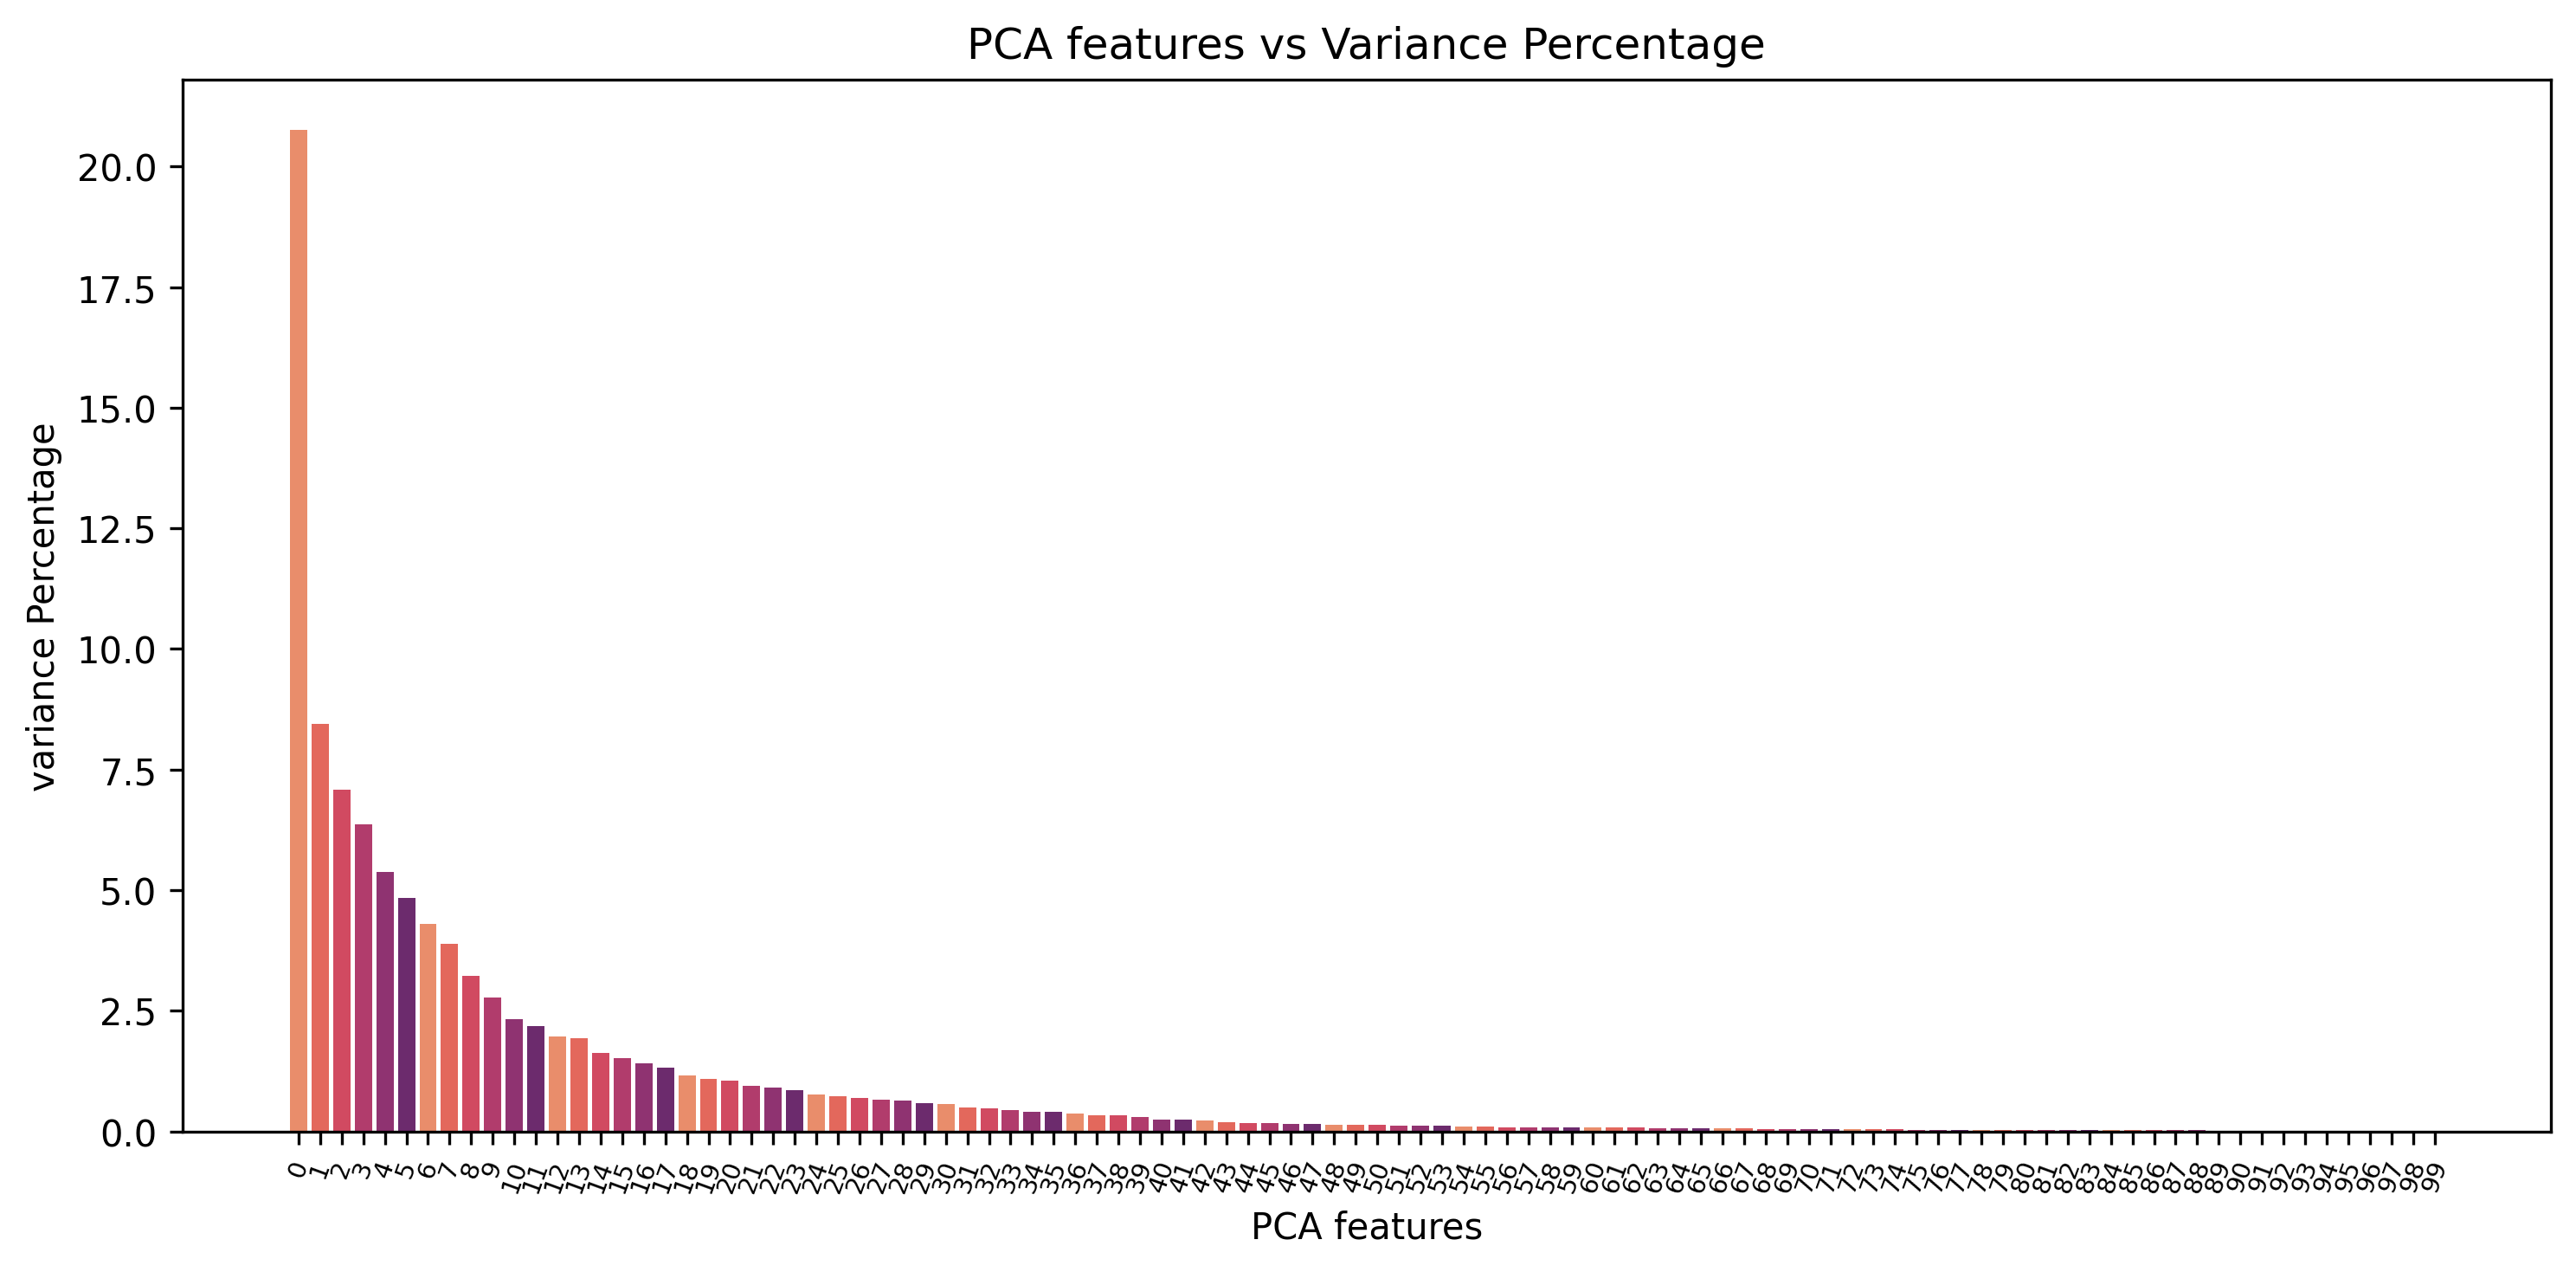 PCA features vs Variance Percentage